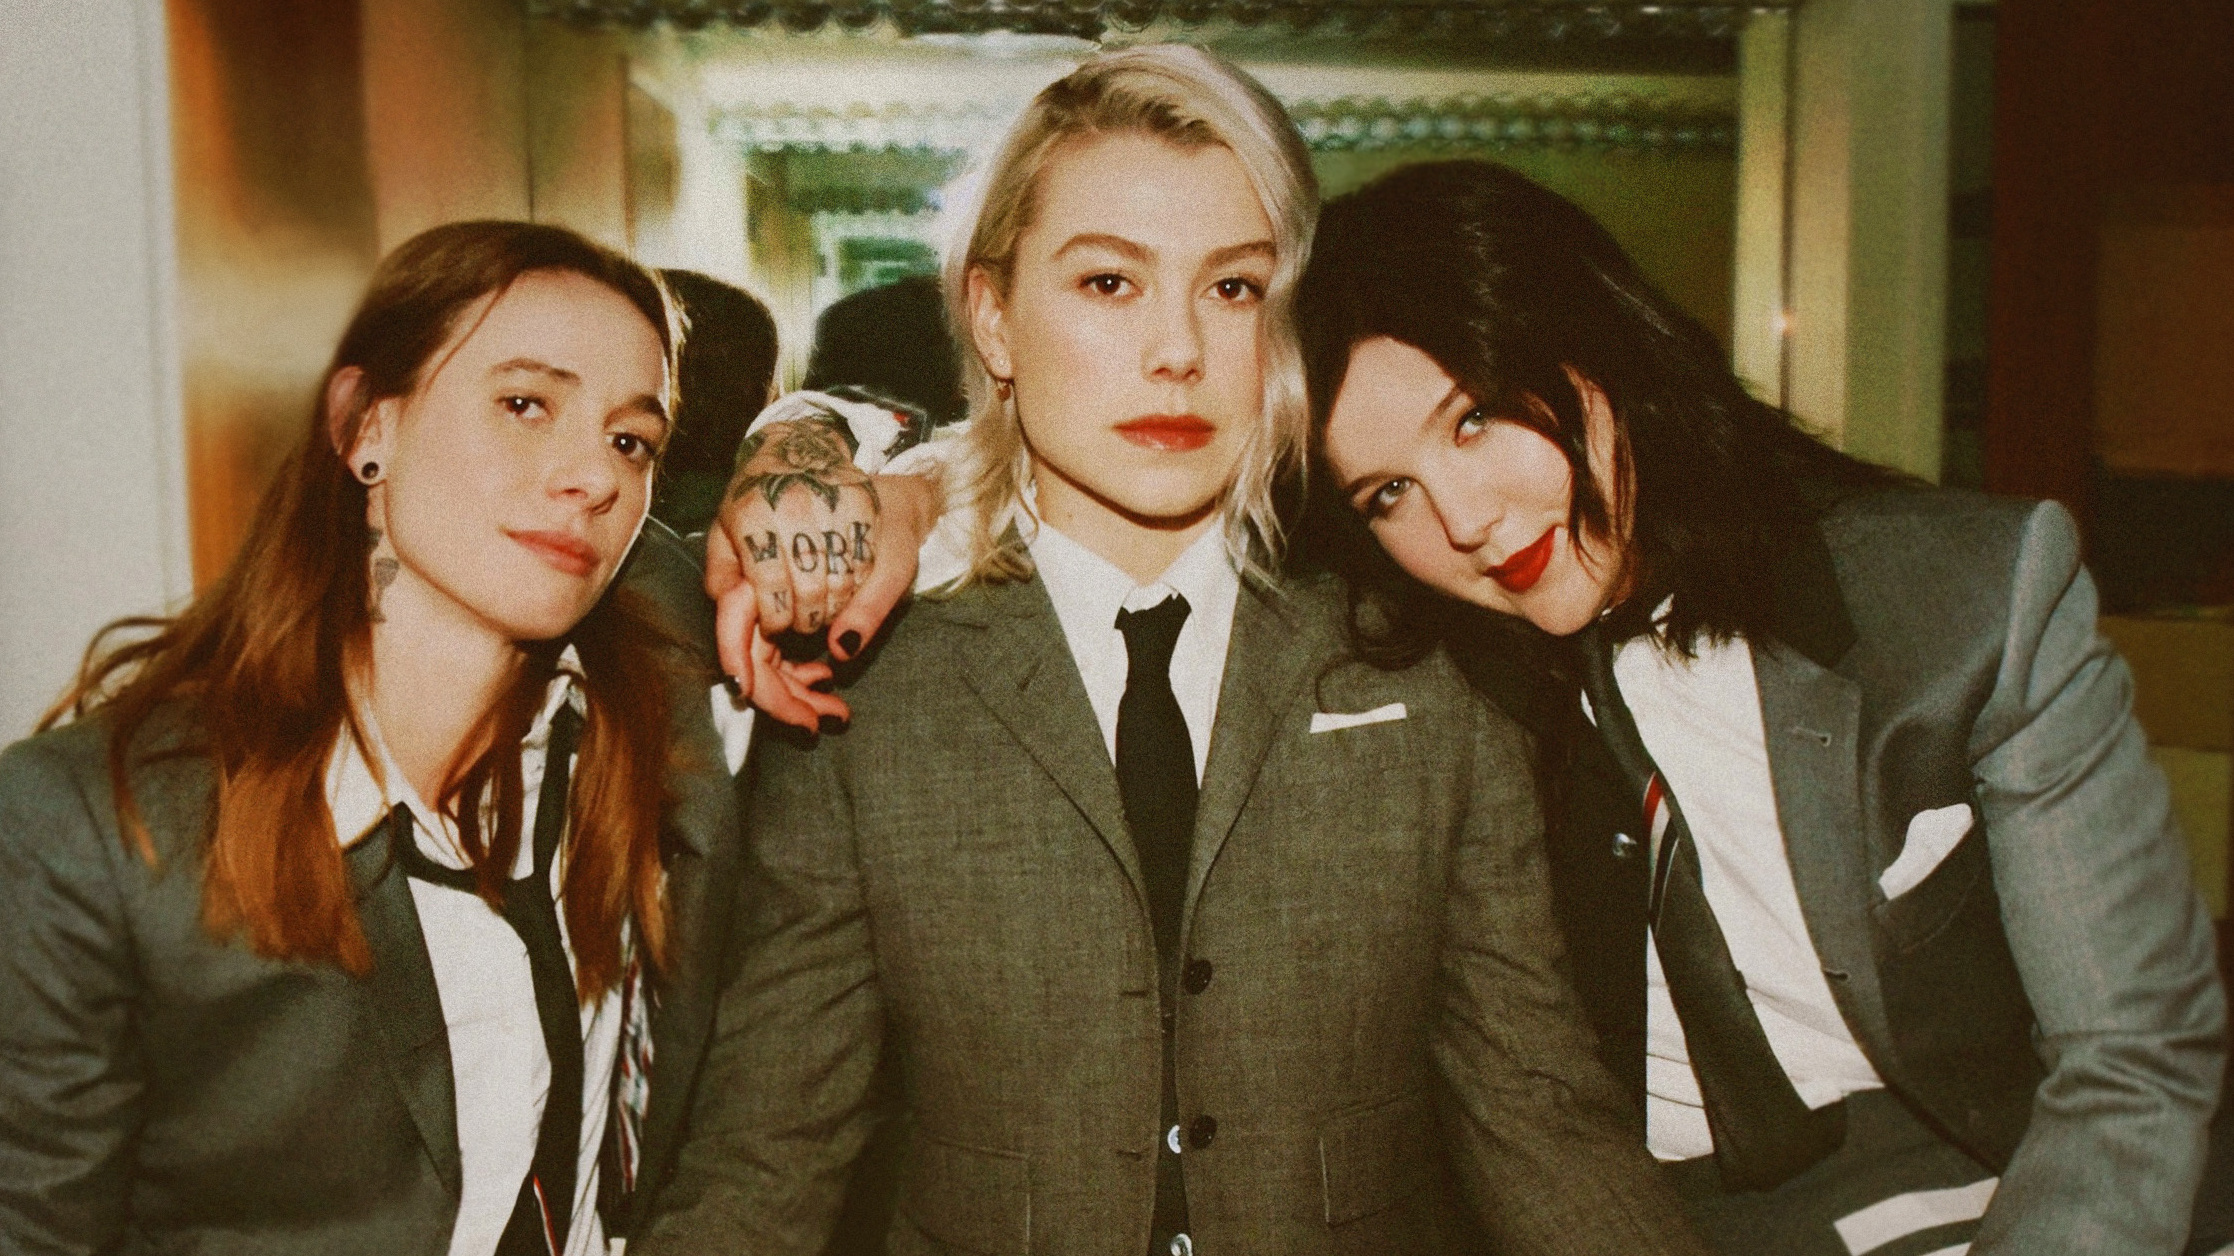 The record, the debut album by the indie supergroup featuring Julien Baker (left), Phoebe Bridgers (center) and Lucy